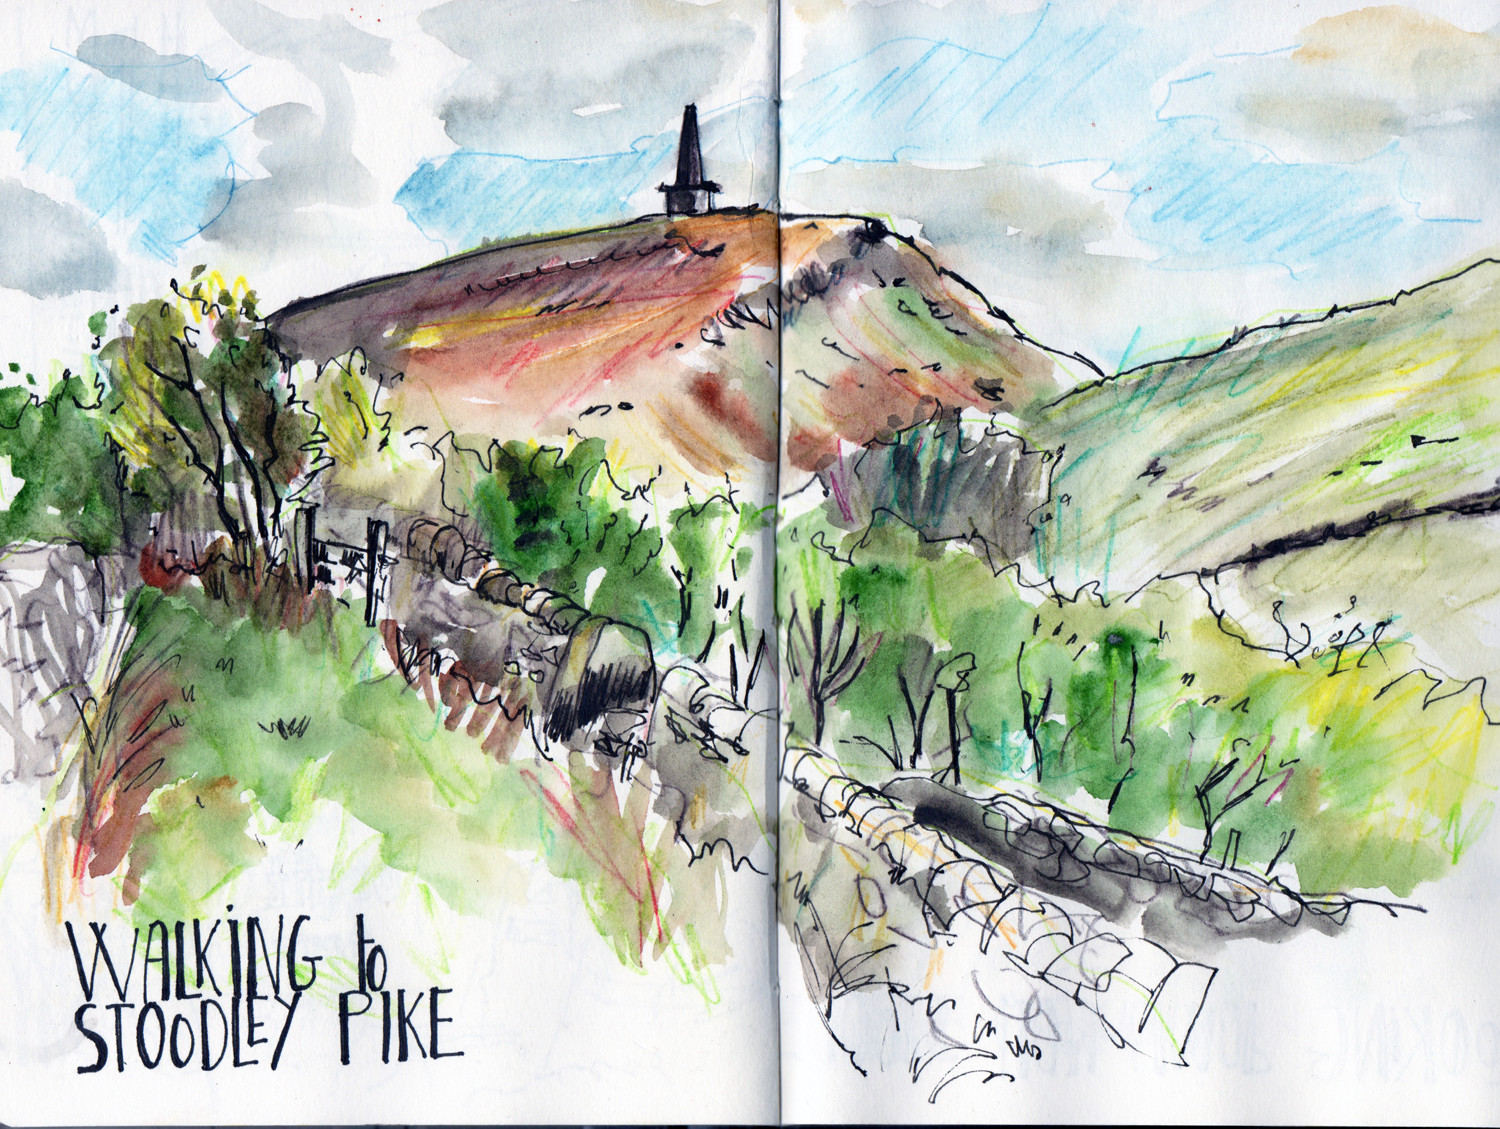 Stooldley Pike Sketch in pen, pencil and watercolour by Sophie Peanut